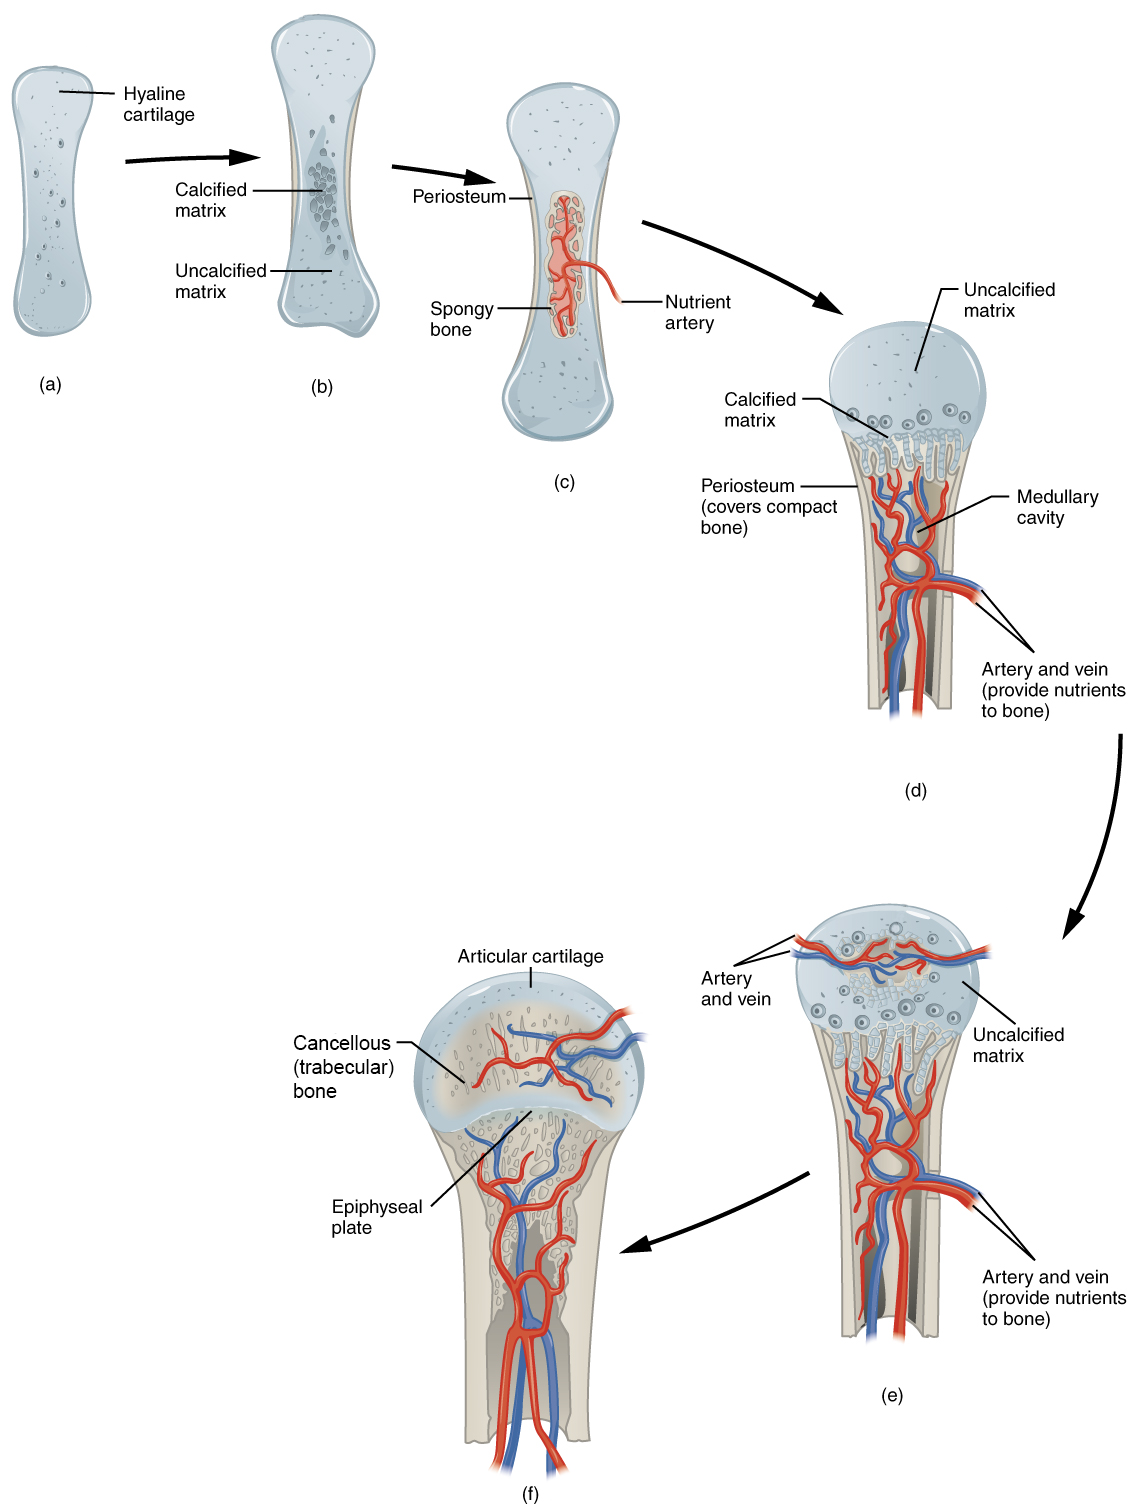 Endochondral ossification begins when mesenchymal cells differentiate into cartilage cells which lay down a cartilage model of the future bony skeleton. Cartilage is then replaced by bone, except at the (epiphyseal) growth plates (which fuse at the end of postnatal growth) and the hyaline (articular) cartilage on the joint surface.